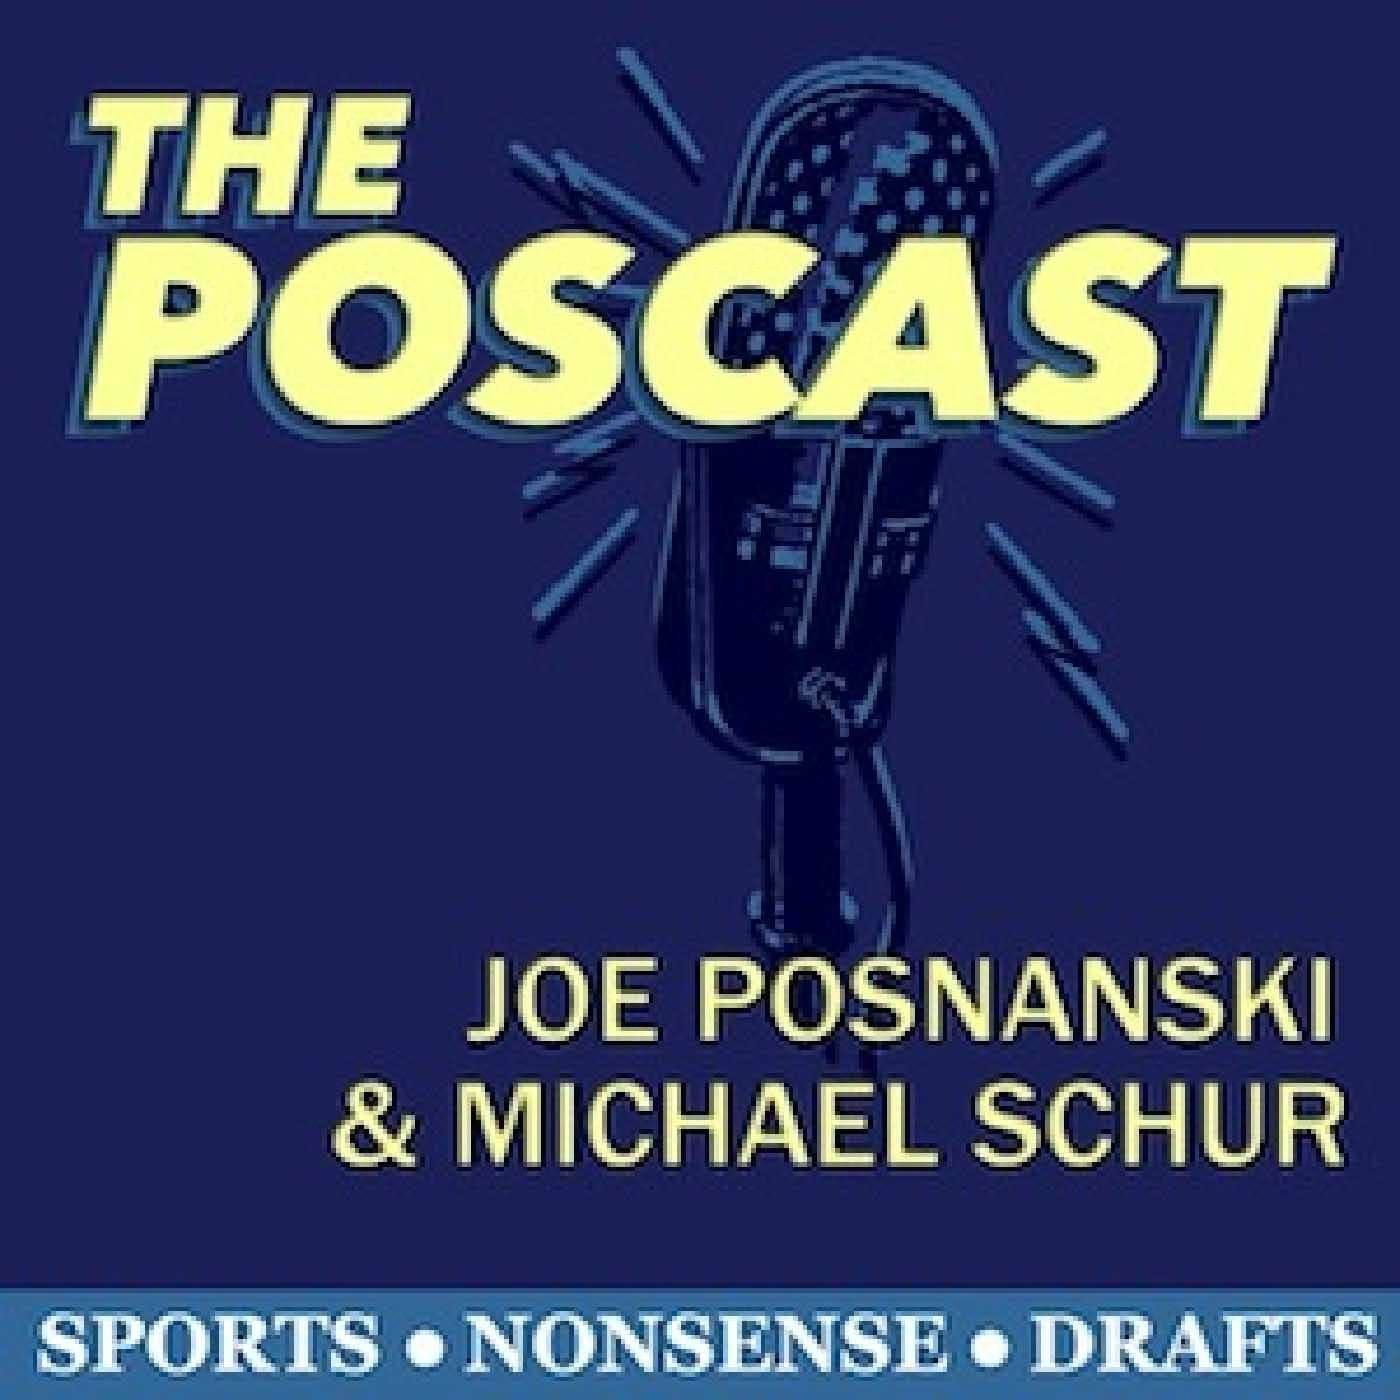 The Return! Picking the 2019 PosCast Player